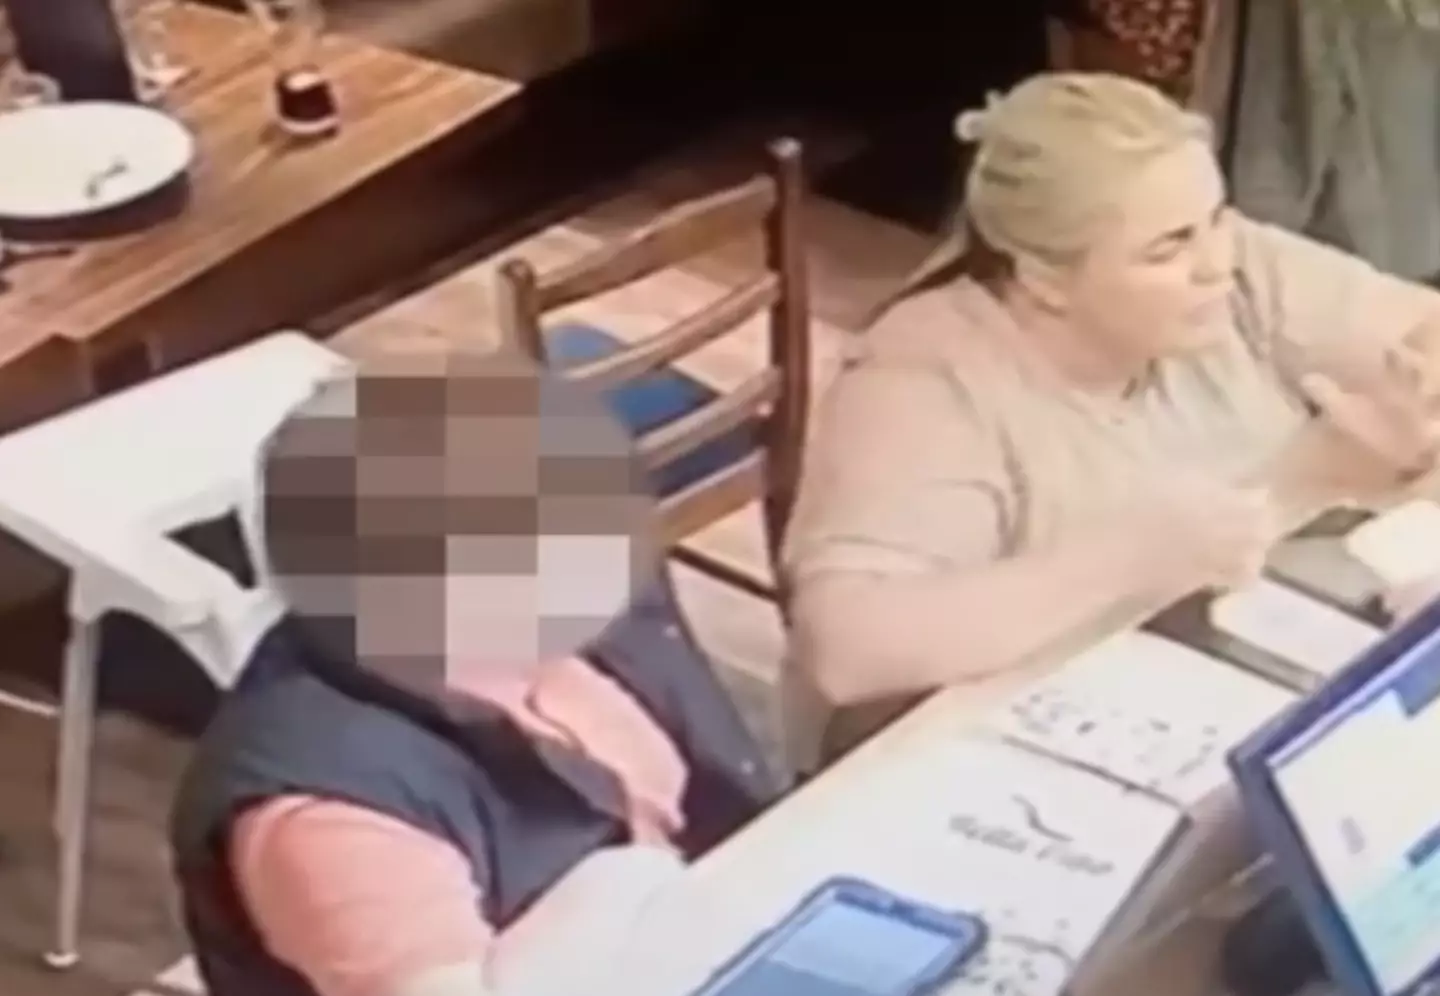 The couple admitted to leaving over £1,000 worth of restaurant bills unpaid, and of shoplifting from supermarkets. (Facebook/Bella Ciao Swansea)